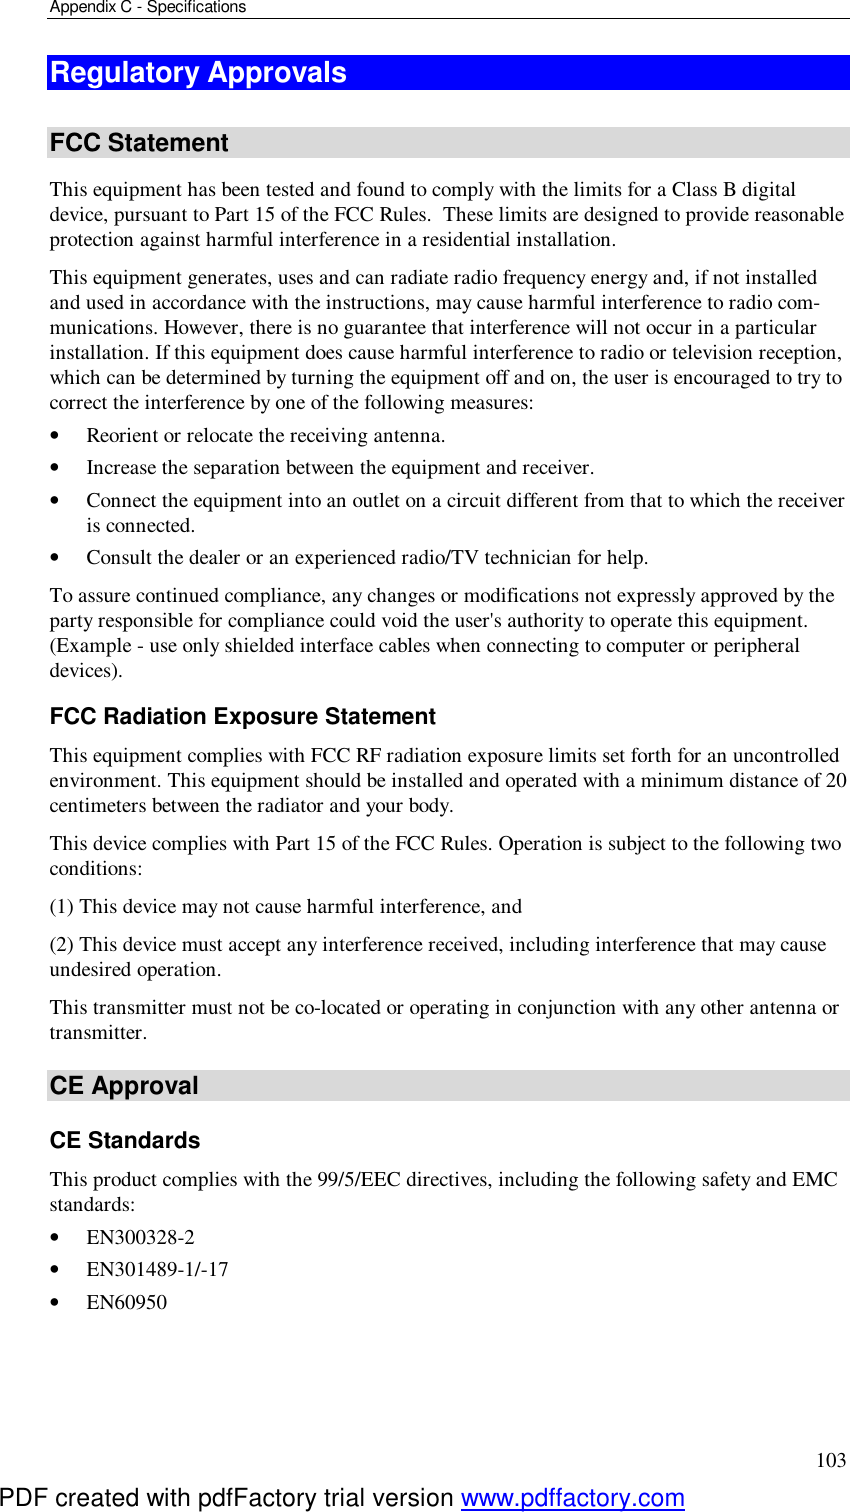 Appendix C - Specifications 103 Regulatory Approvals  FCC Statement This equipment has been tested and found to comply with the limits for a Class B digital device, pursuant to Part 15 of the FCC Rules.  These limits are designed to provide reasonable protection against harmful interference in a residential installation.  This equipment generates, uses and can radiate radio frequency energy and, if not installed and used in accordance with the instructions, may cause harmful interference to radio com-munications. However, there is no guarantee that interference will not occur in a particular installation. If this equipment does cause harmful interference to radio or television reception, which can be determined by turning the equipment off and on, the user is encouraged to try to correct the interference by one of the following measures: •  Reorient or relocate the receiving antenna. •  Increase the separation between the equipment and receiver. •  Connect the equipment into an outlet on a circuit different from that to which the receiver is connected. •  Consult the dealer or an experienced radio/TV technician for help. To assure continued compliance, any changes or modifications not expressly approved by the party responsible for compliance could void the user&apos;s authority to operate this equipment. (Example - use only shielded interface cables when connecting to computer or peripheral devices). FCC Radiation Exposure Statement This equipment complies with FCC RF radiation exposure limits set forth for an uncontrolled environment. This equipment should be installed and operated with a minimum distance of 20 centimeters between the radiator and your body. This device complies with Part 15 of the FCC Rules. Operation is subject to the following two conditions:  (1) This device may not cause harmful interference, and  (2) This device must accept any interference received, including interference that may cause undesired operation. This transmitter must not be co-located or operating in conjunction with any other antenna or transmitter. CE Approval CE Standards This product complies with the 99/5/EEC directives, including the following safety and EMC standards: •  EN300328-2 •  EN301489-1/-17 •  EN60950 PDF created with pdfFactory trial version www.pdffactory.com